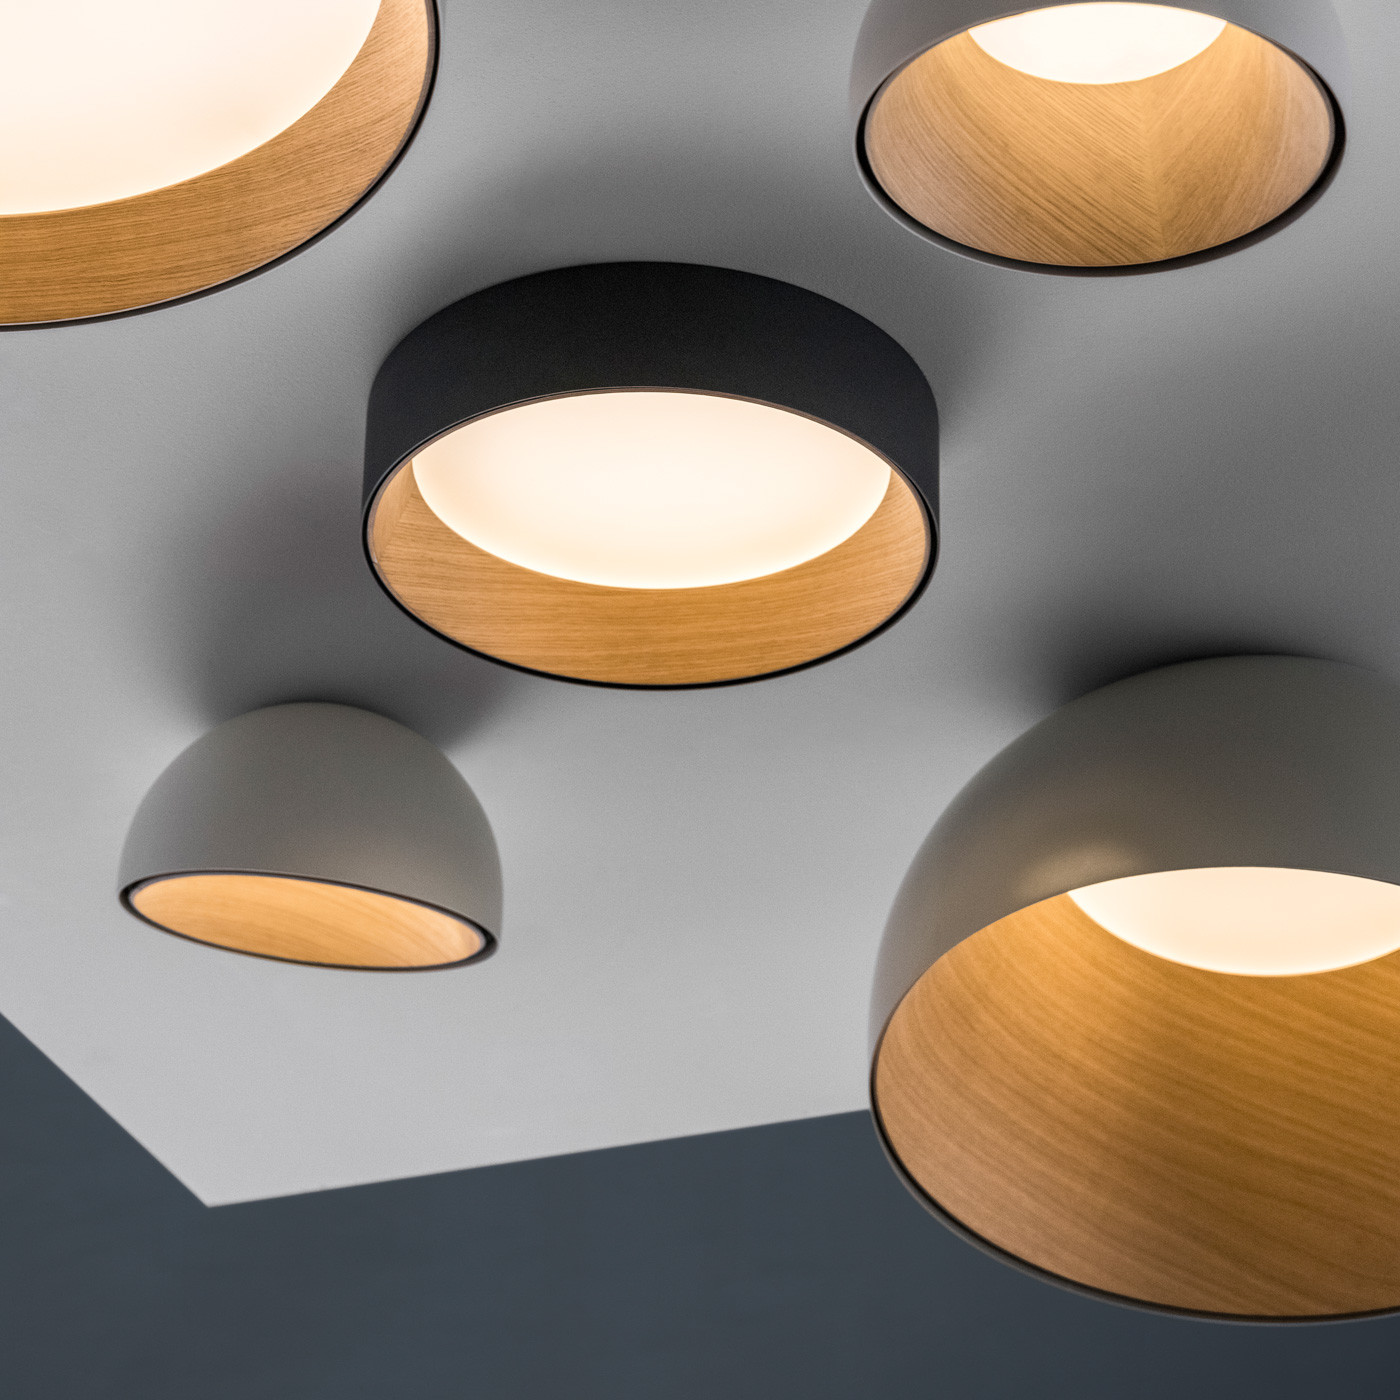 Vibia Duo 4876 Ceiling Light at Nostraforma